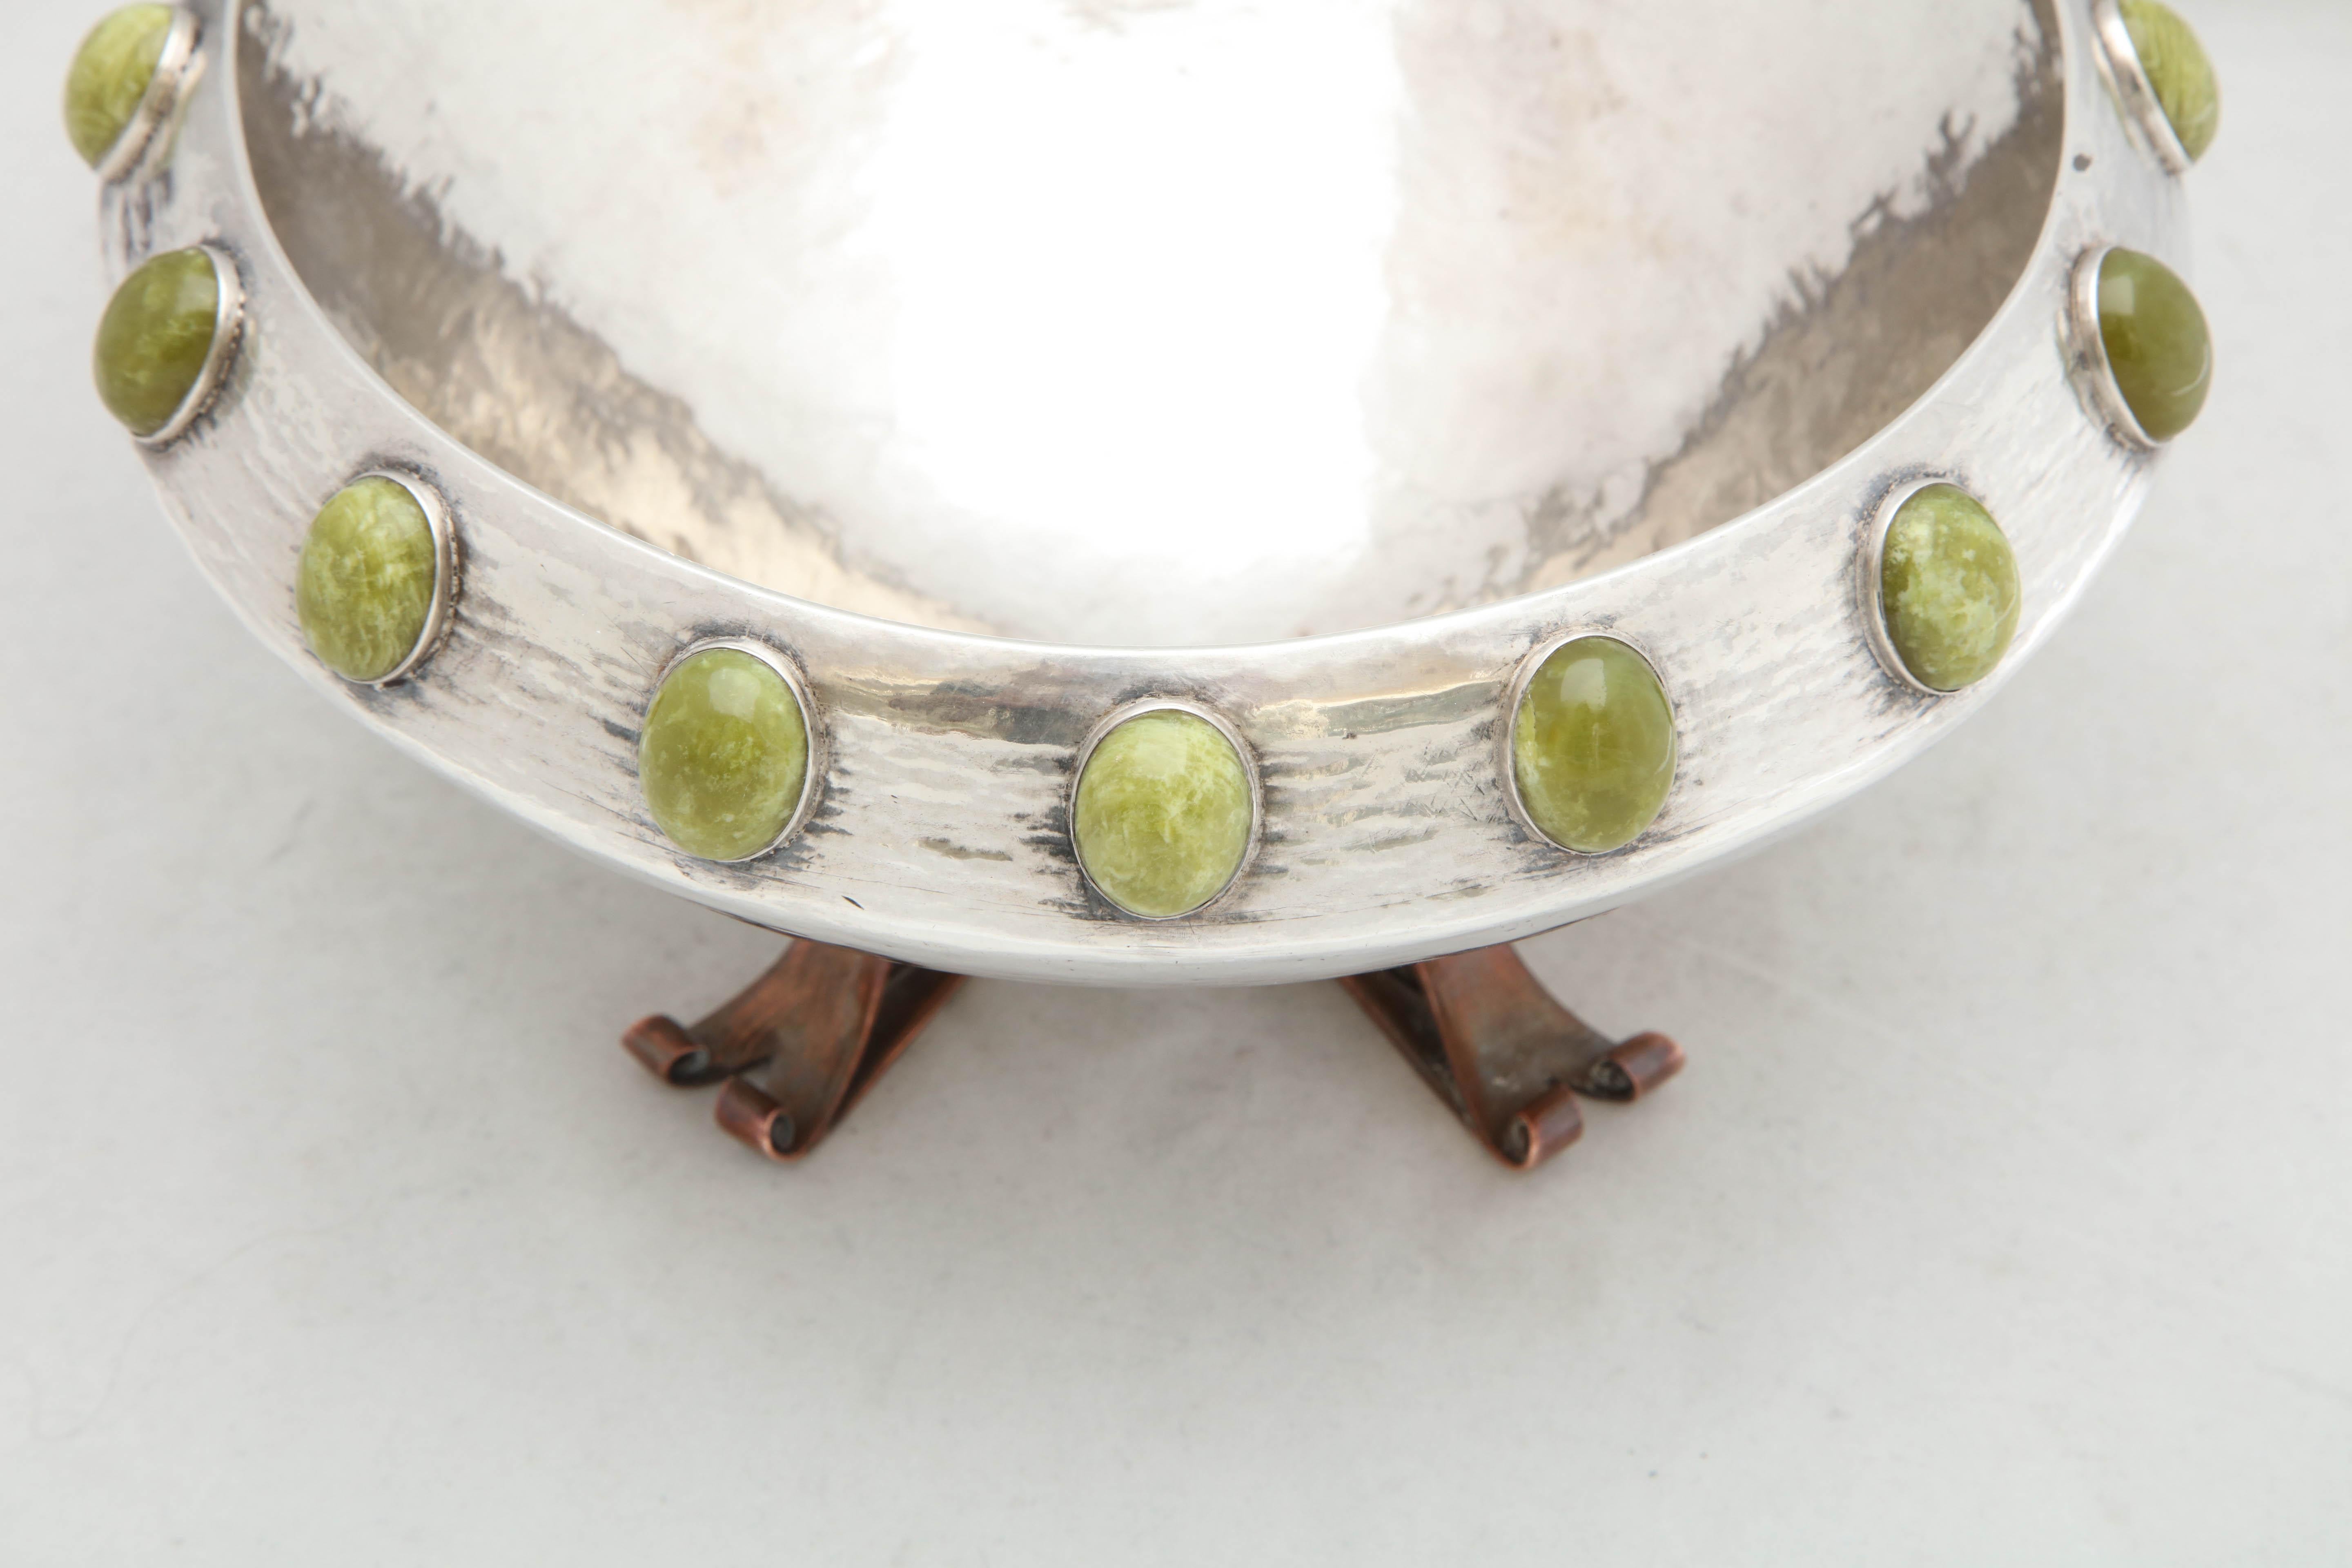 Arts & Crafts, Sterling Silver, Mixed Metals and Hardstone Bowl 1